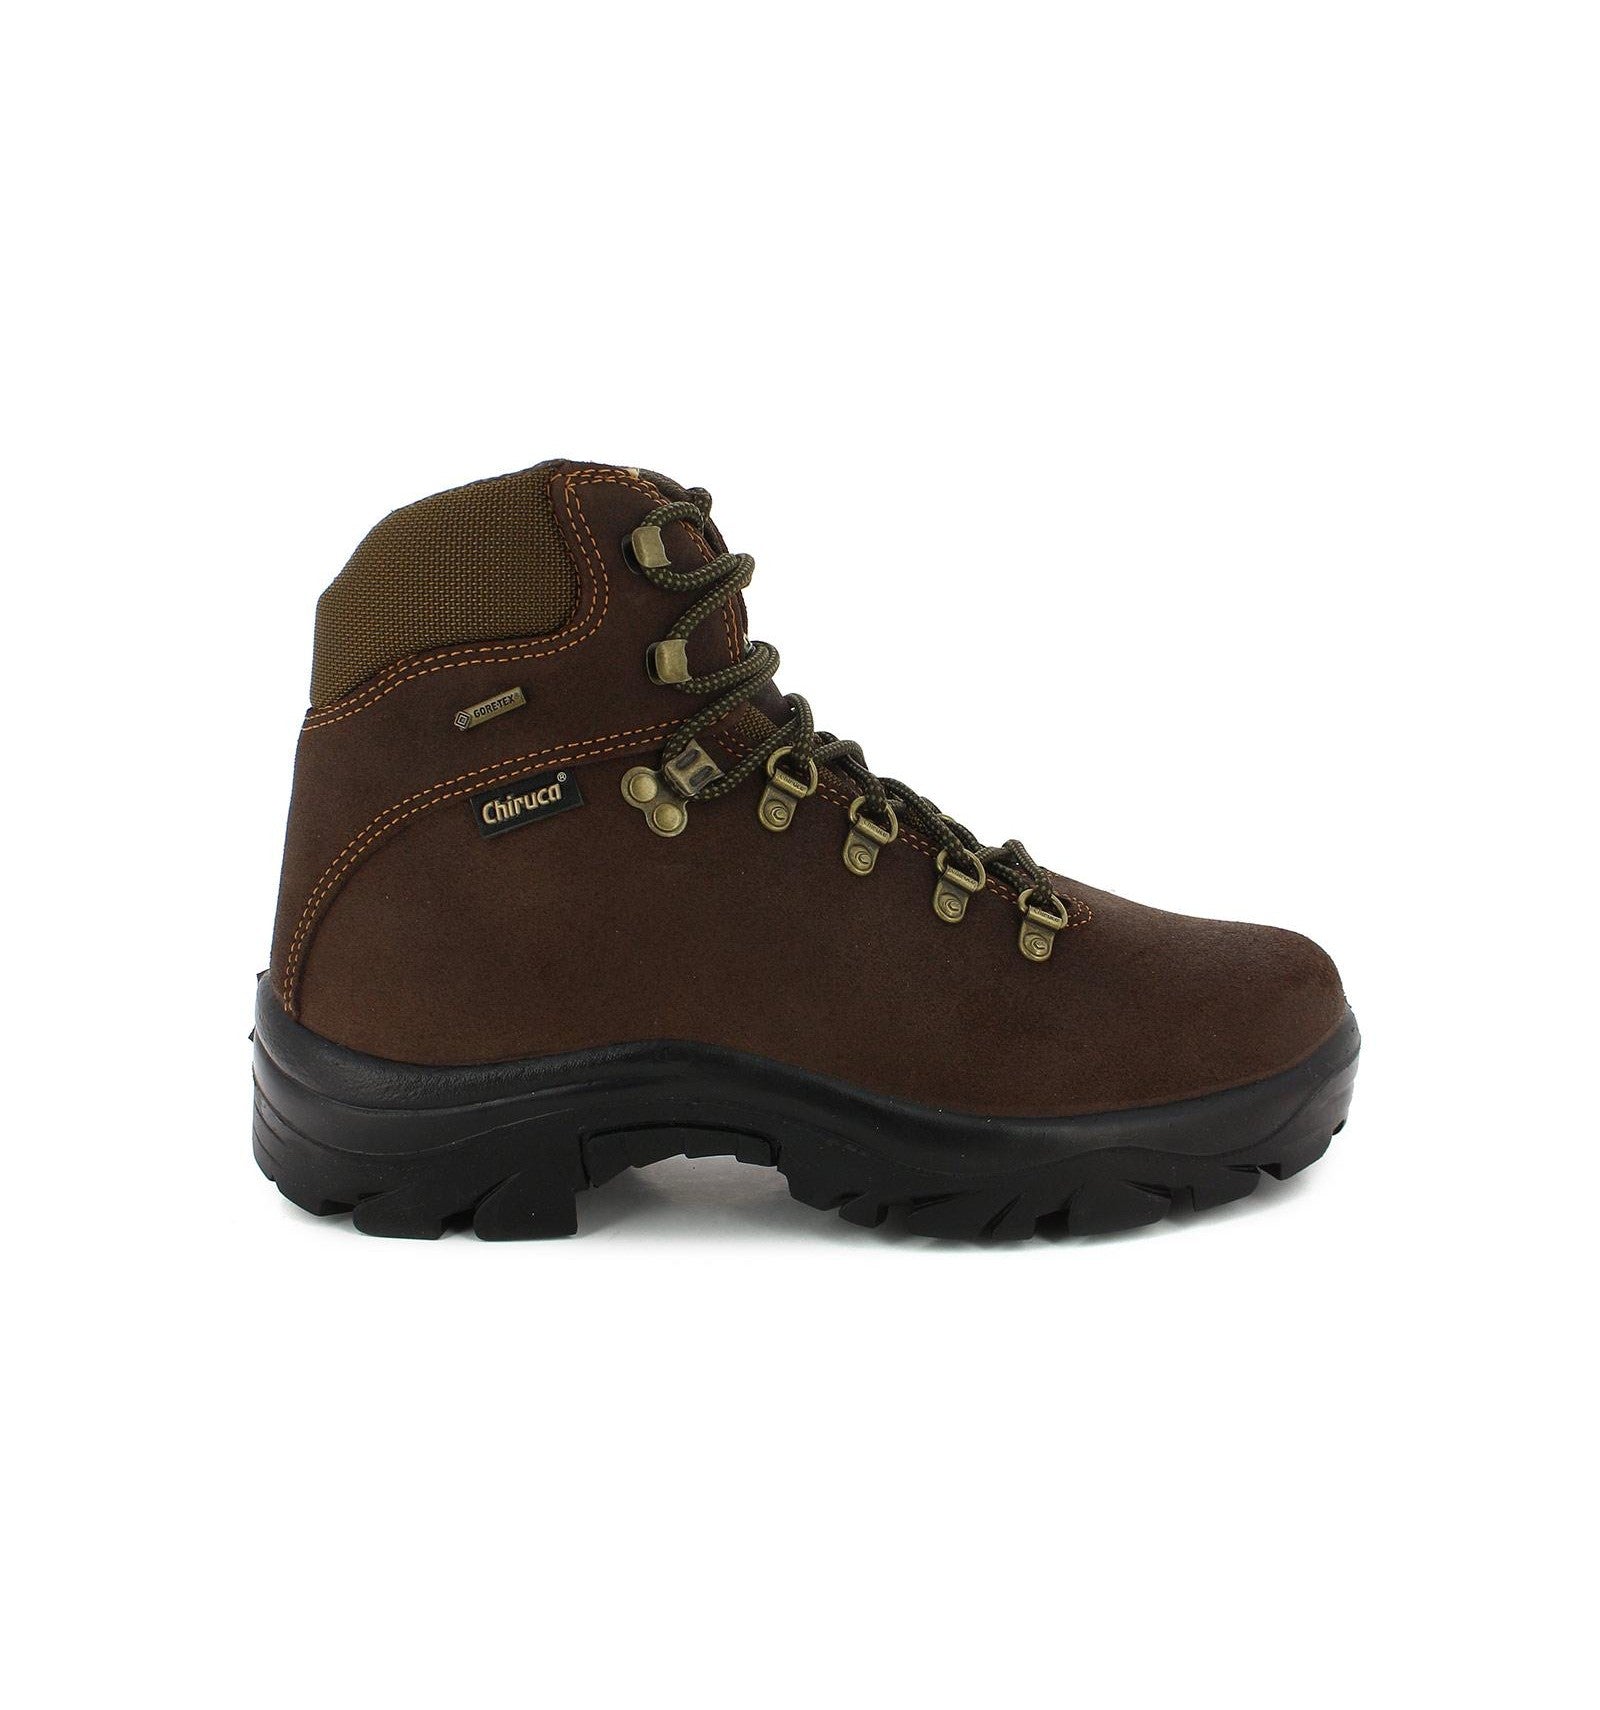 Pointer Gore-Tex Hunting Boot